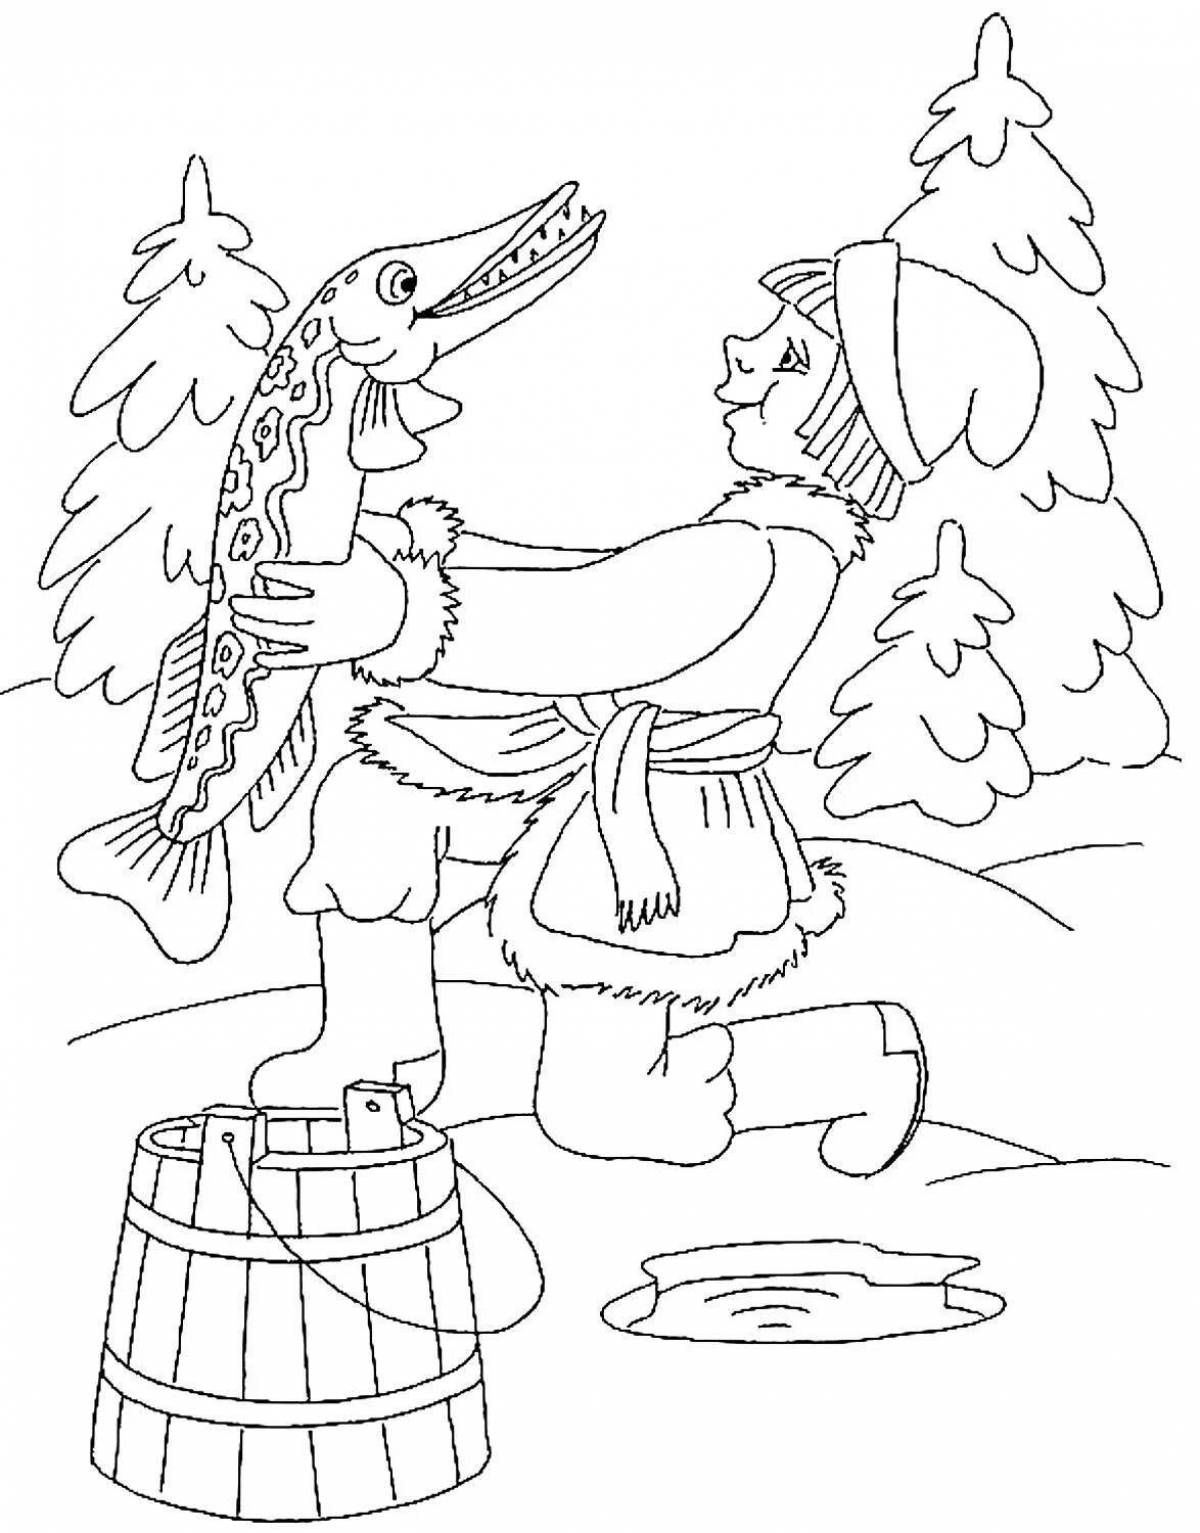 Bright coloring book based on Russian folk tales